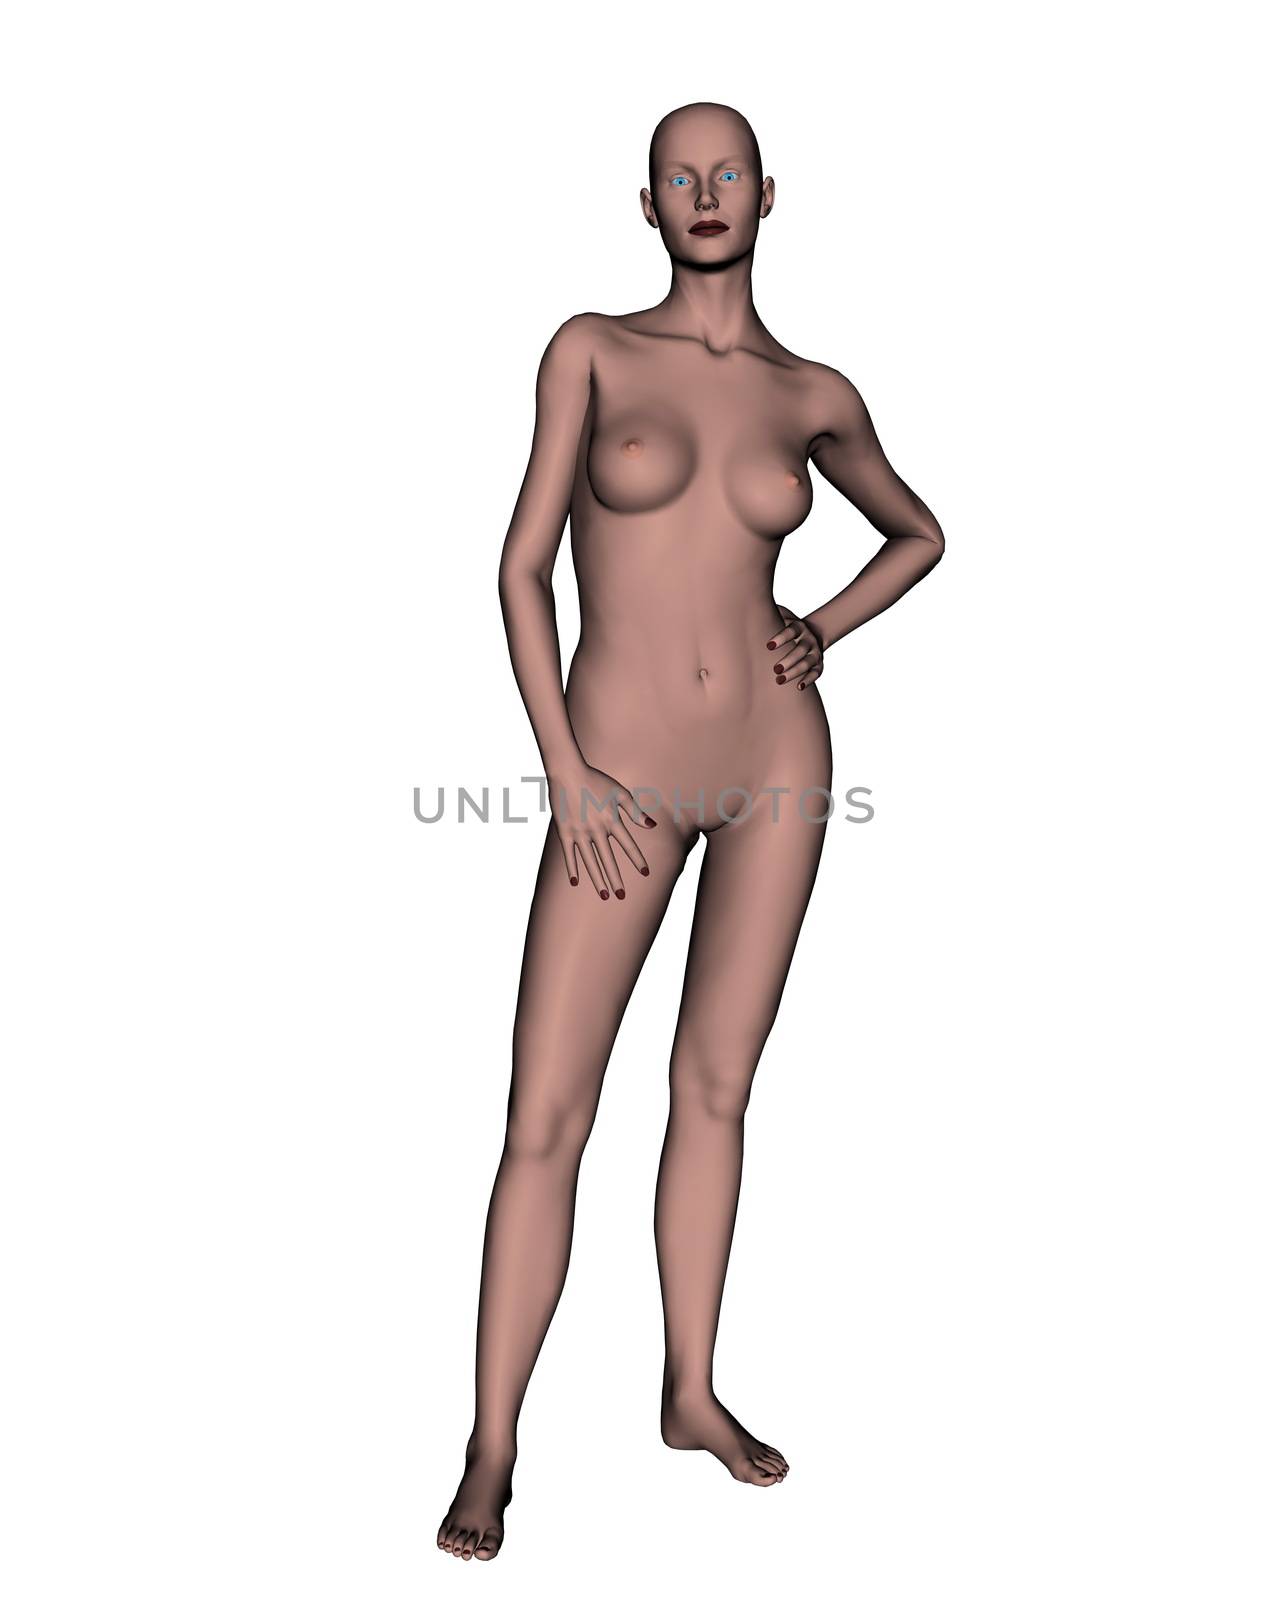 Nude of a female standing up with sensuality in white background